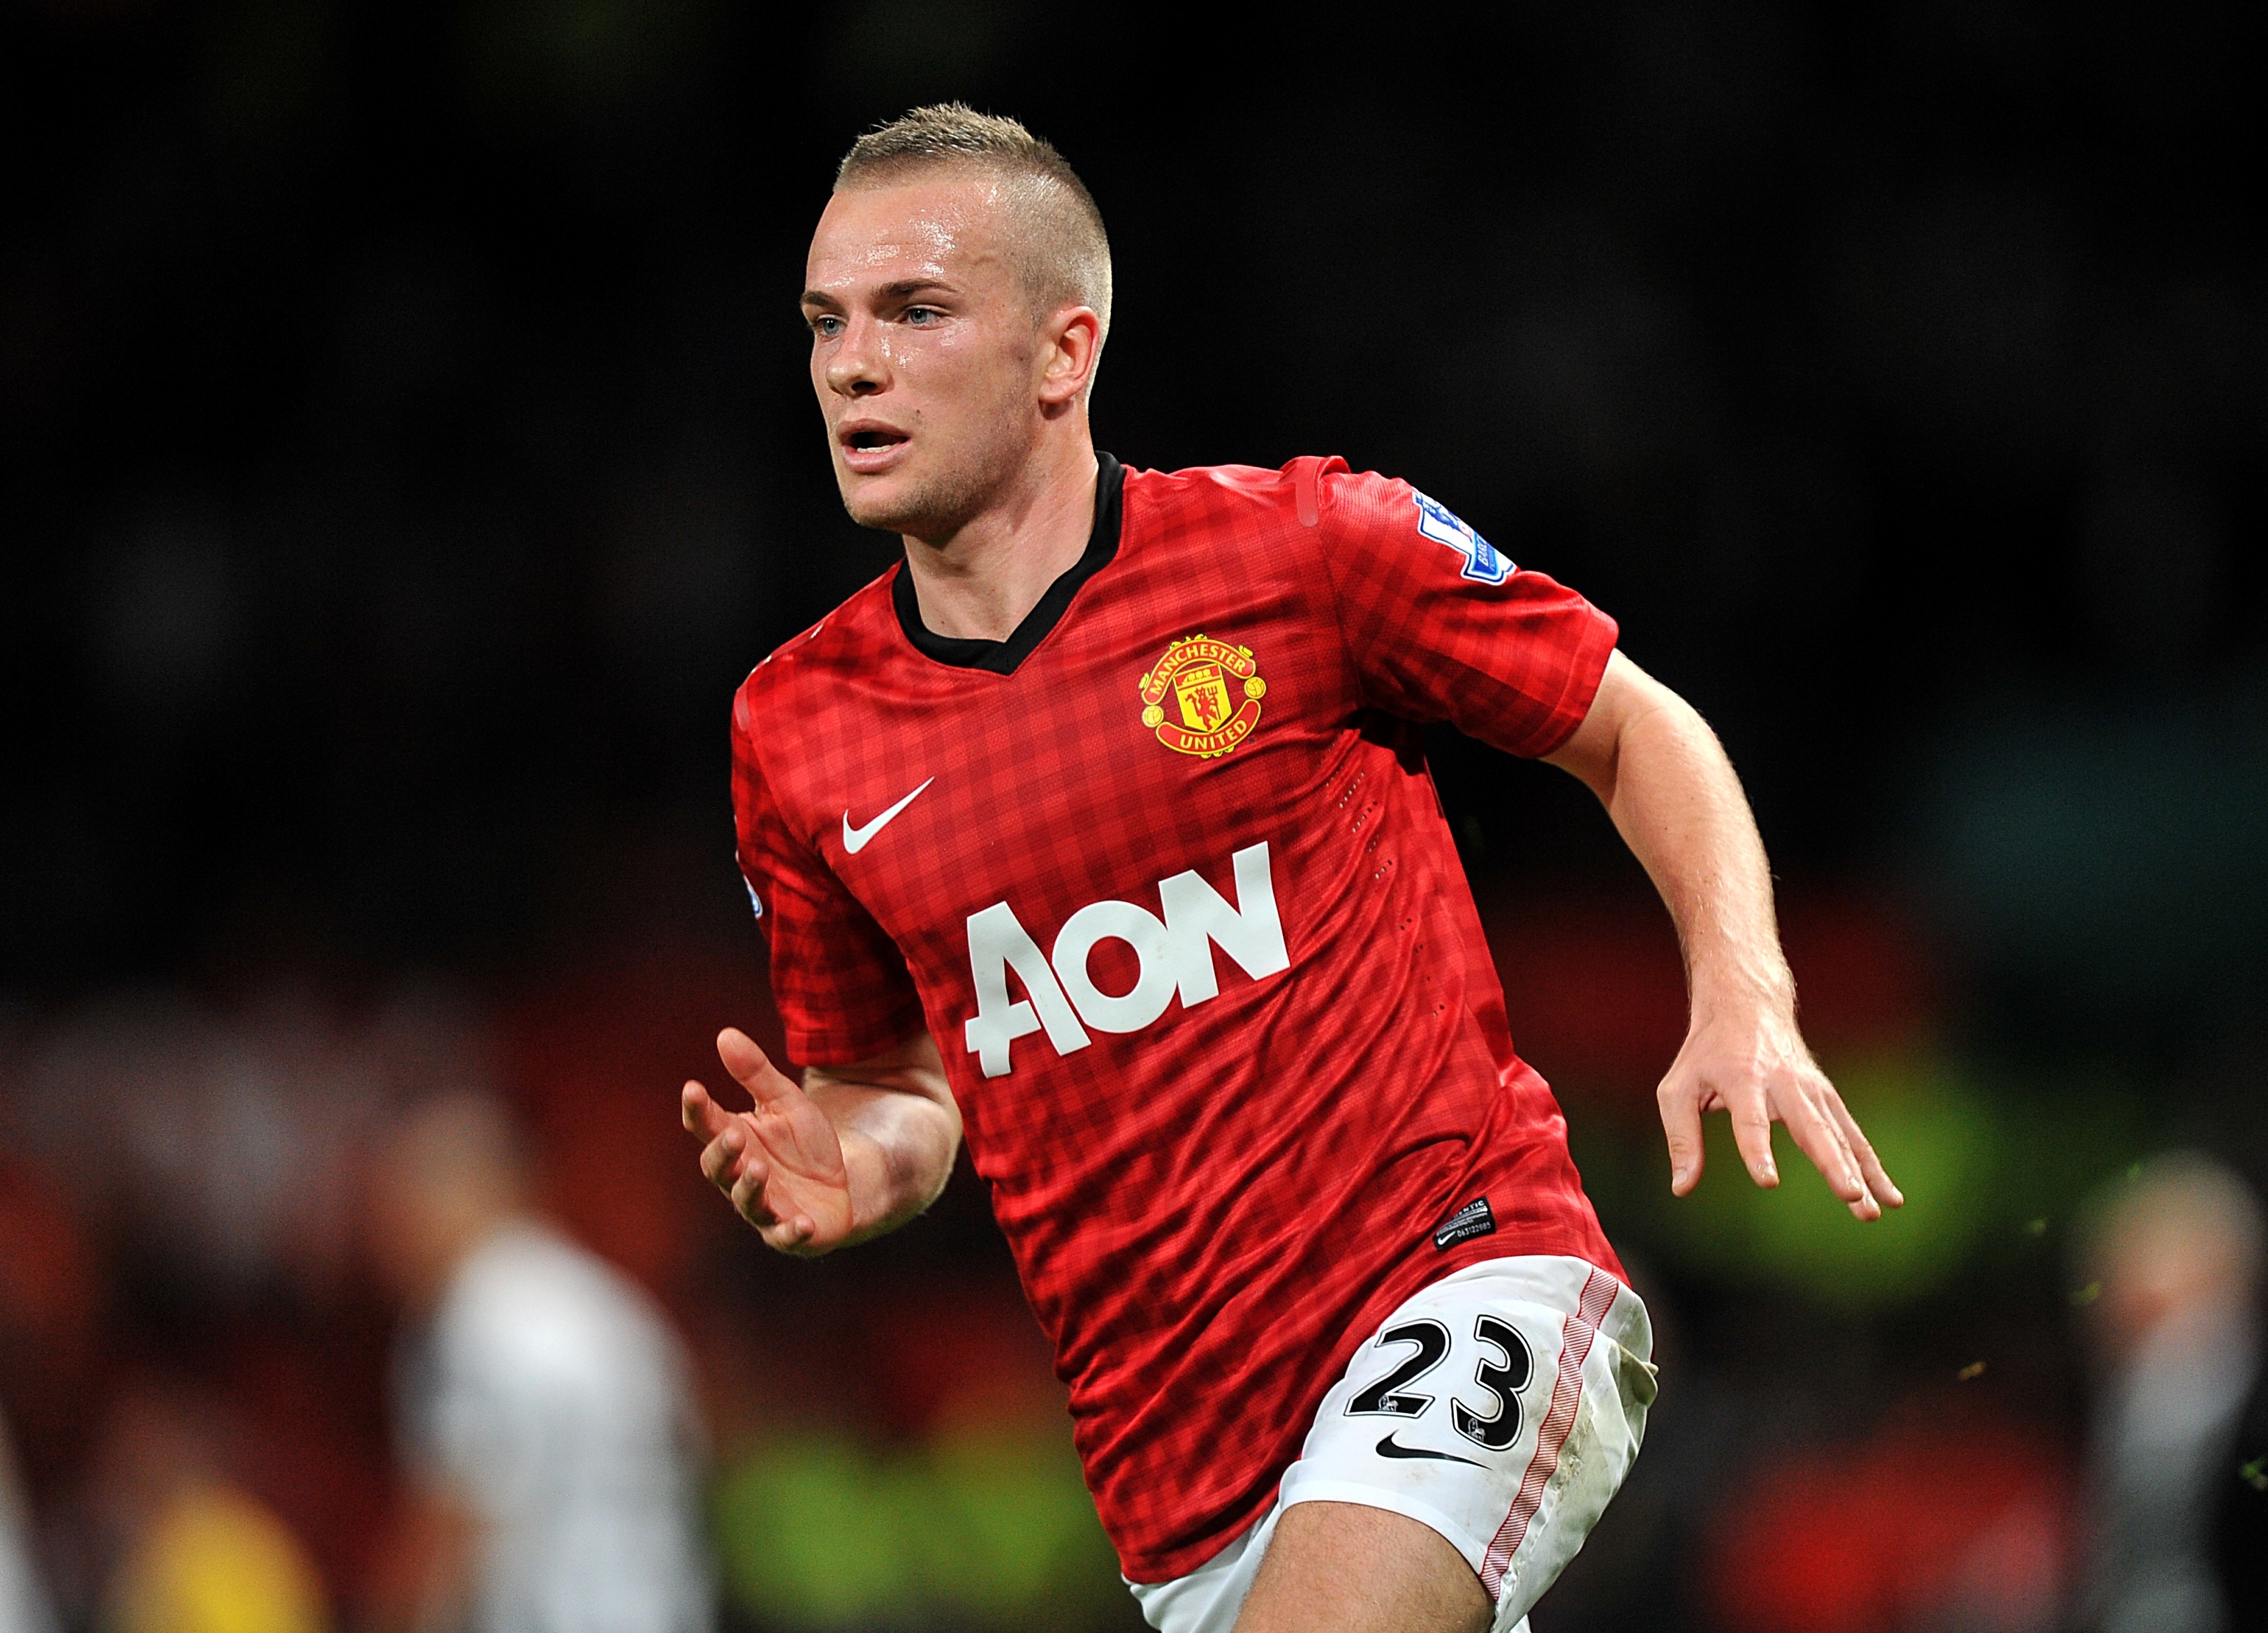 Cleverley tom Tom Cleverley